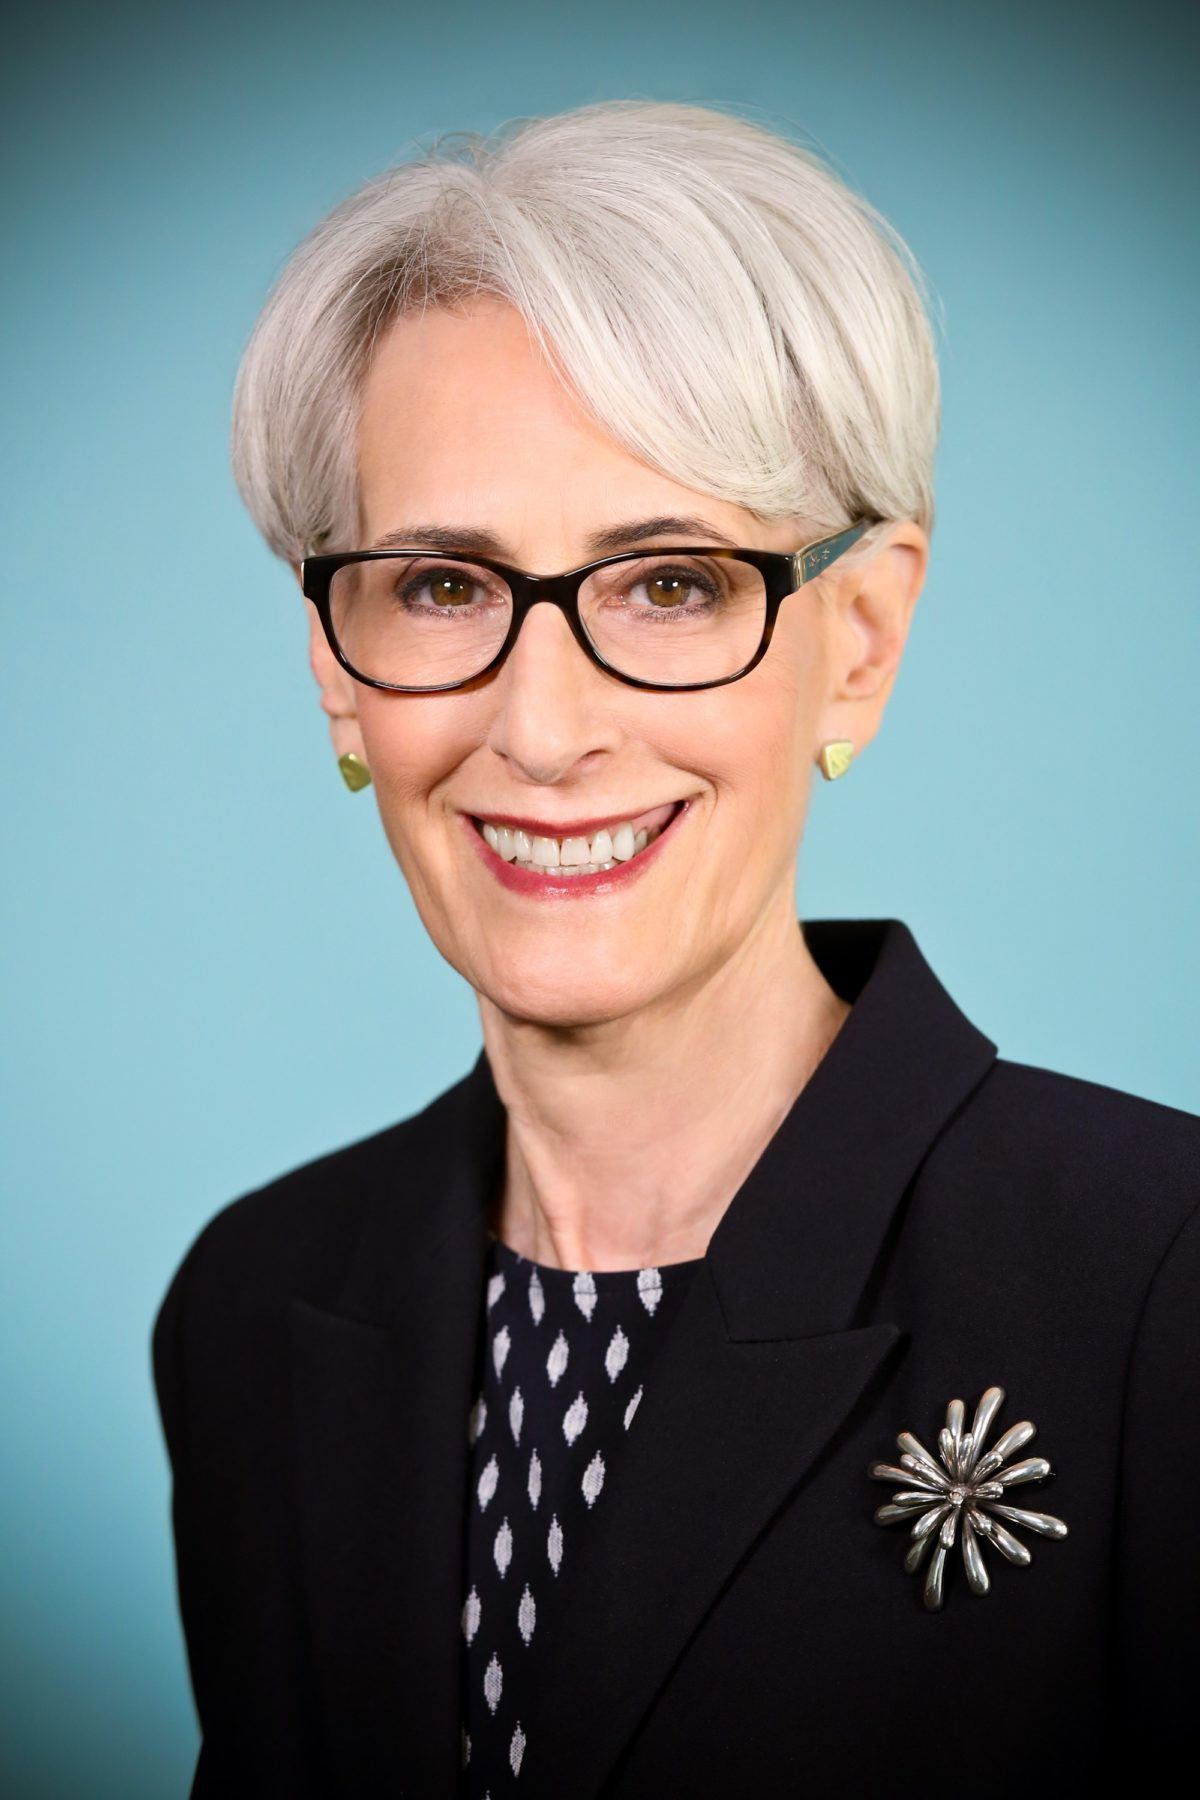 Wendy R. Sherman, Ambassador and Counselor of the Department of State